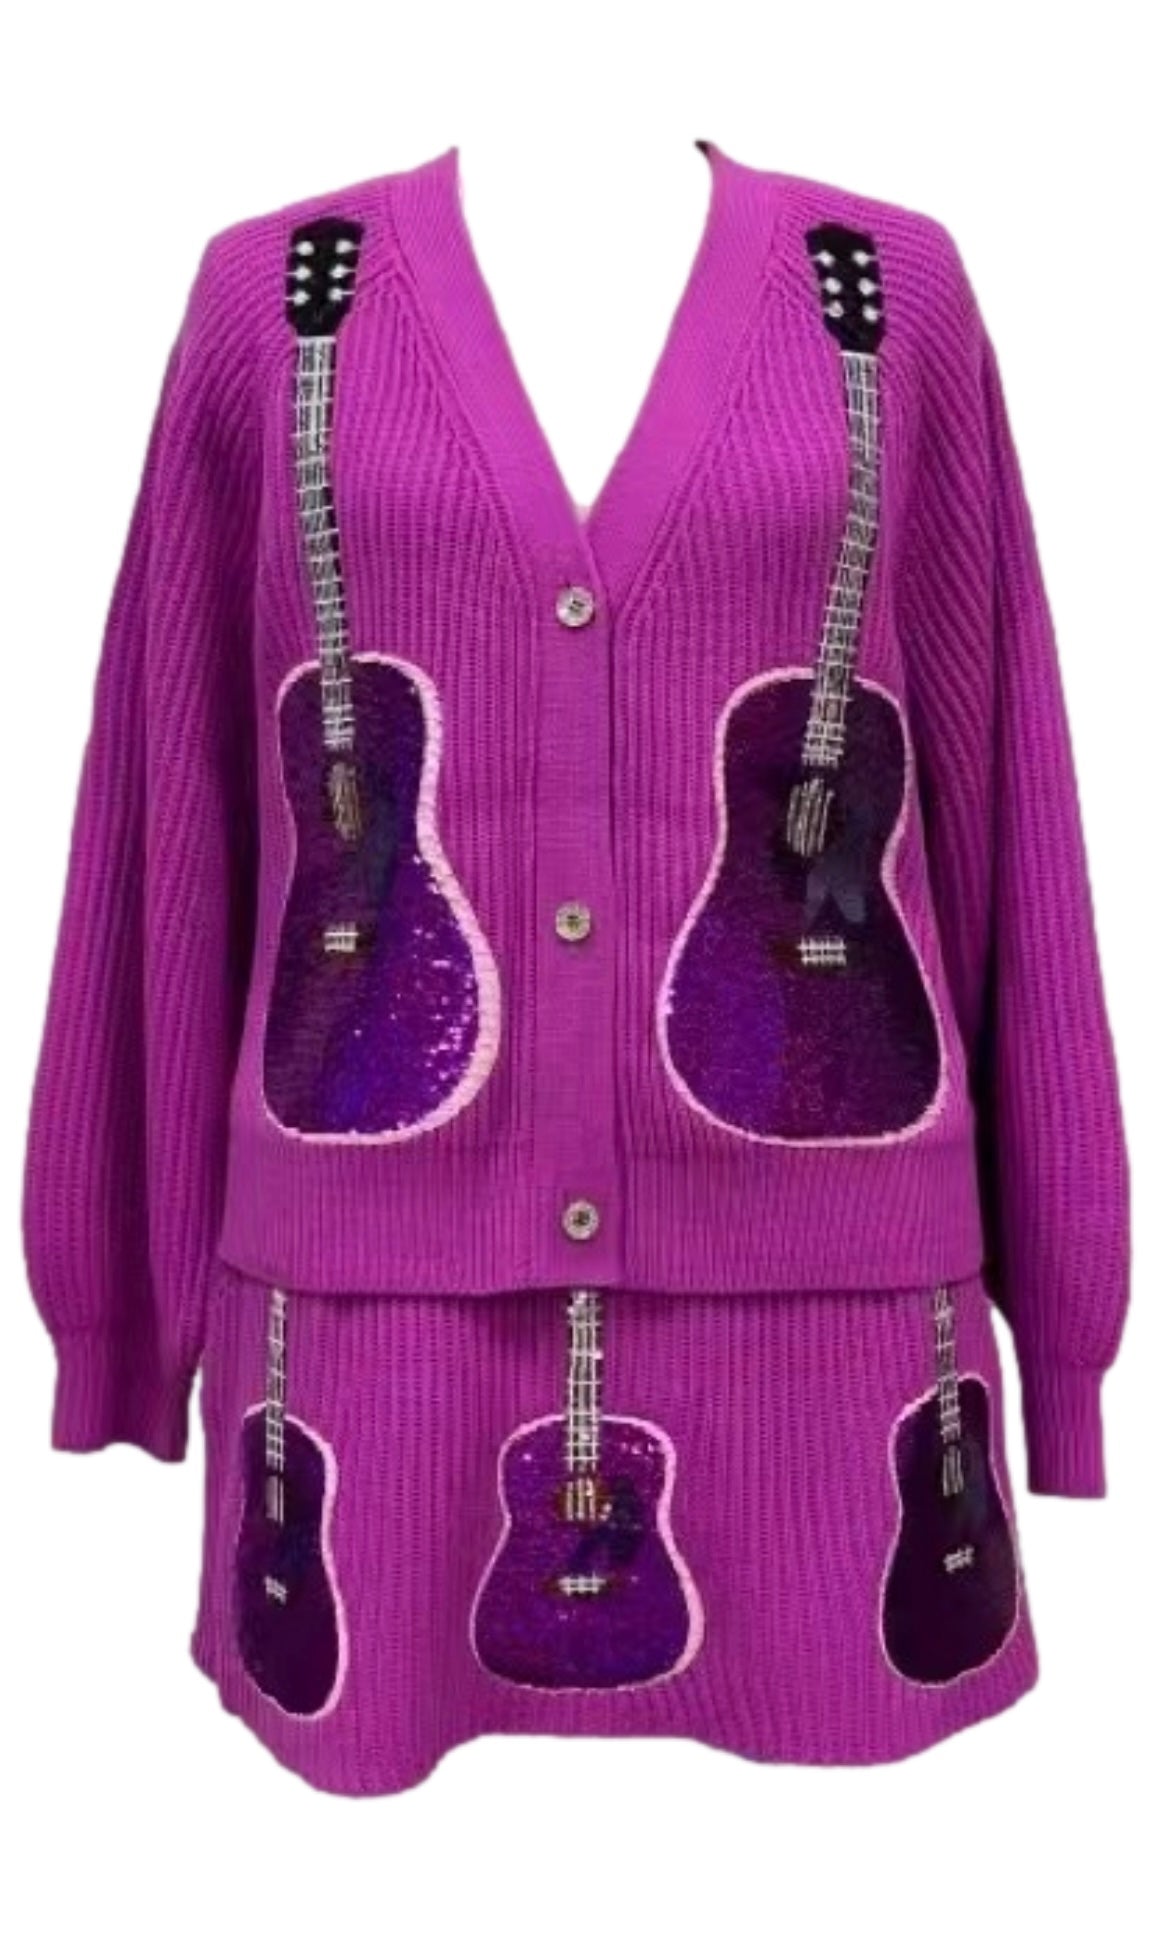 Queen of Sparkles Bright Purple Guitar Cardigan and Skirt